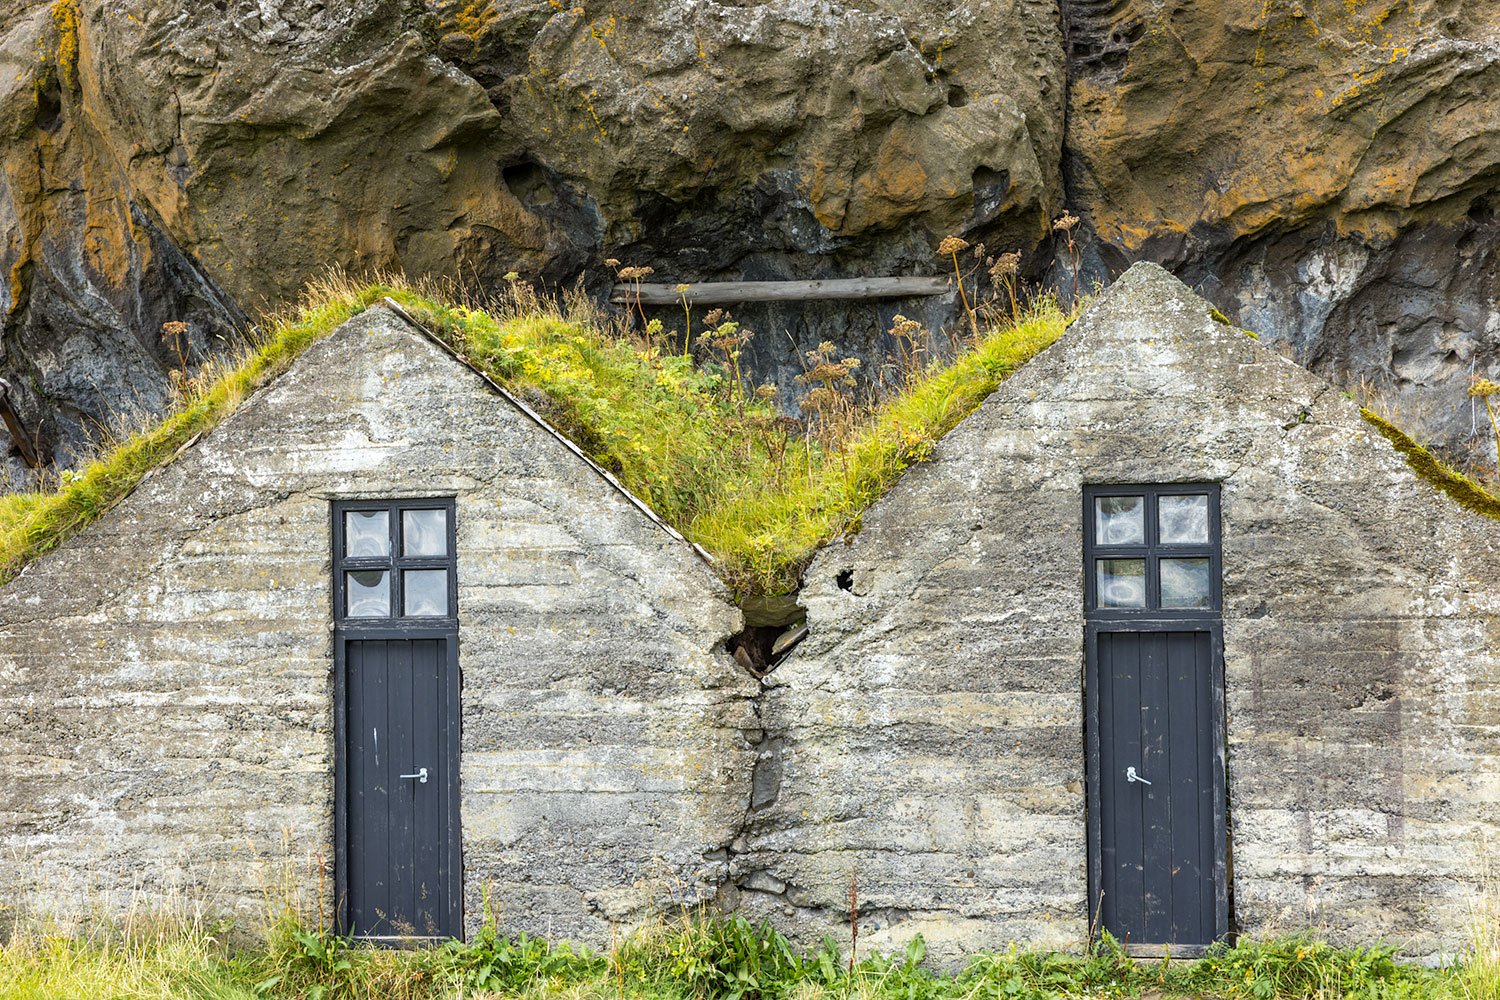 Grass Roofed Dwellings at Drangshlioll. Iceland, 2022